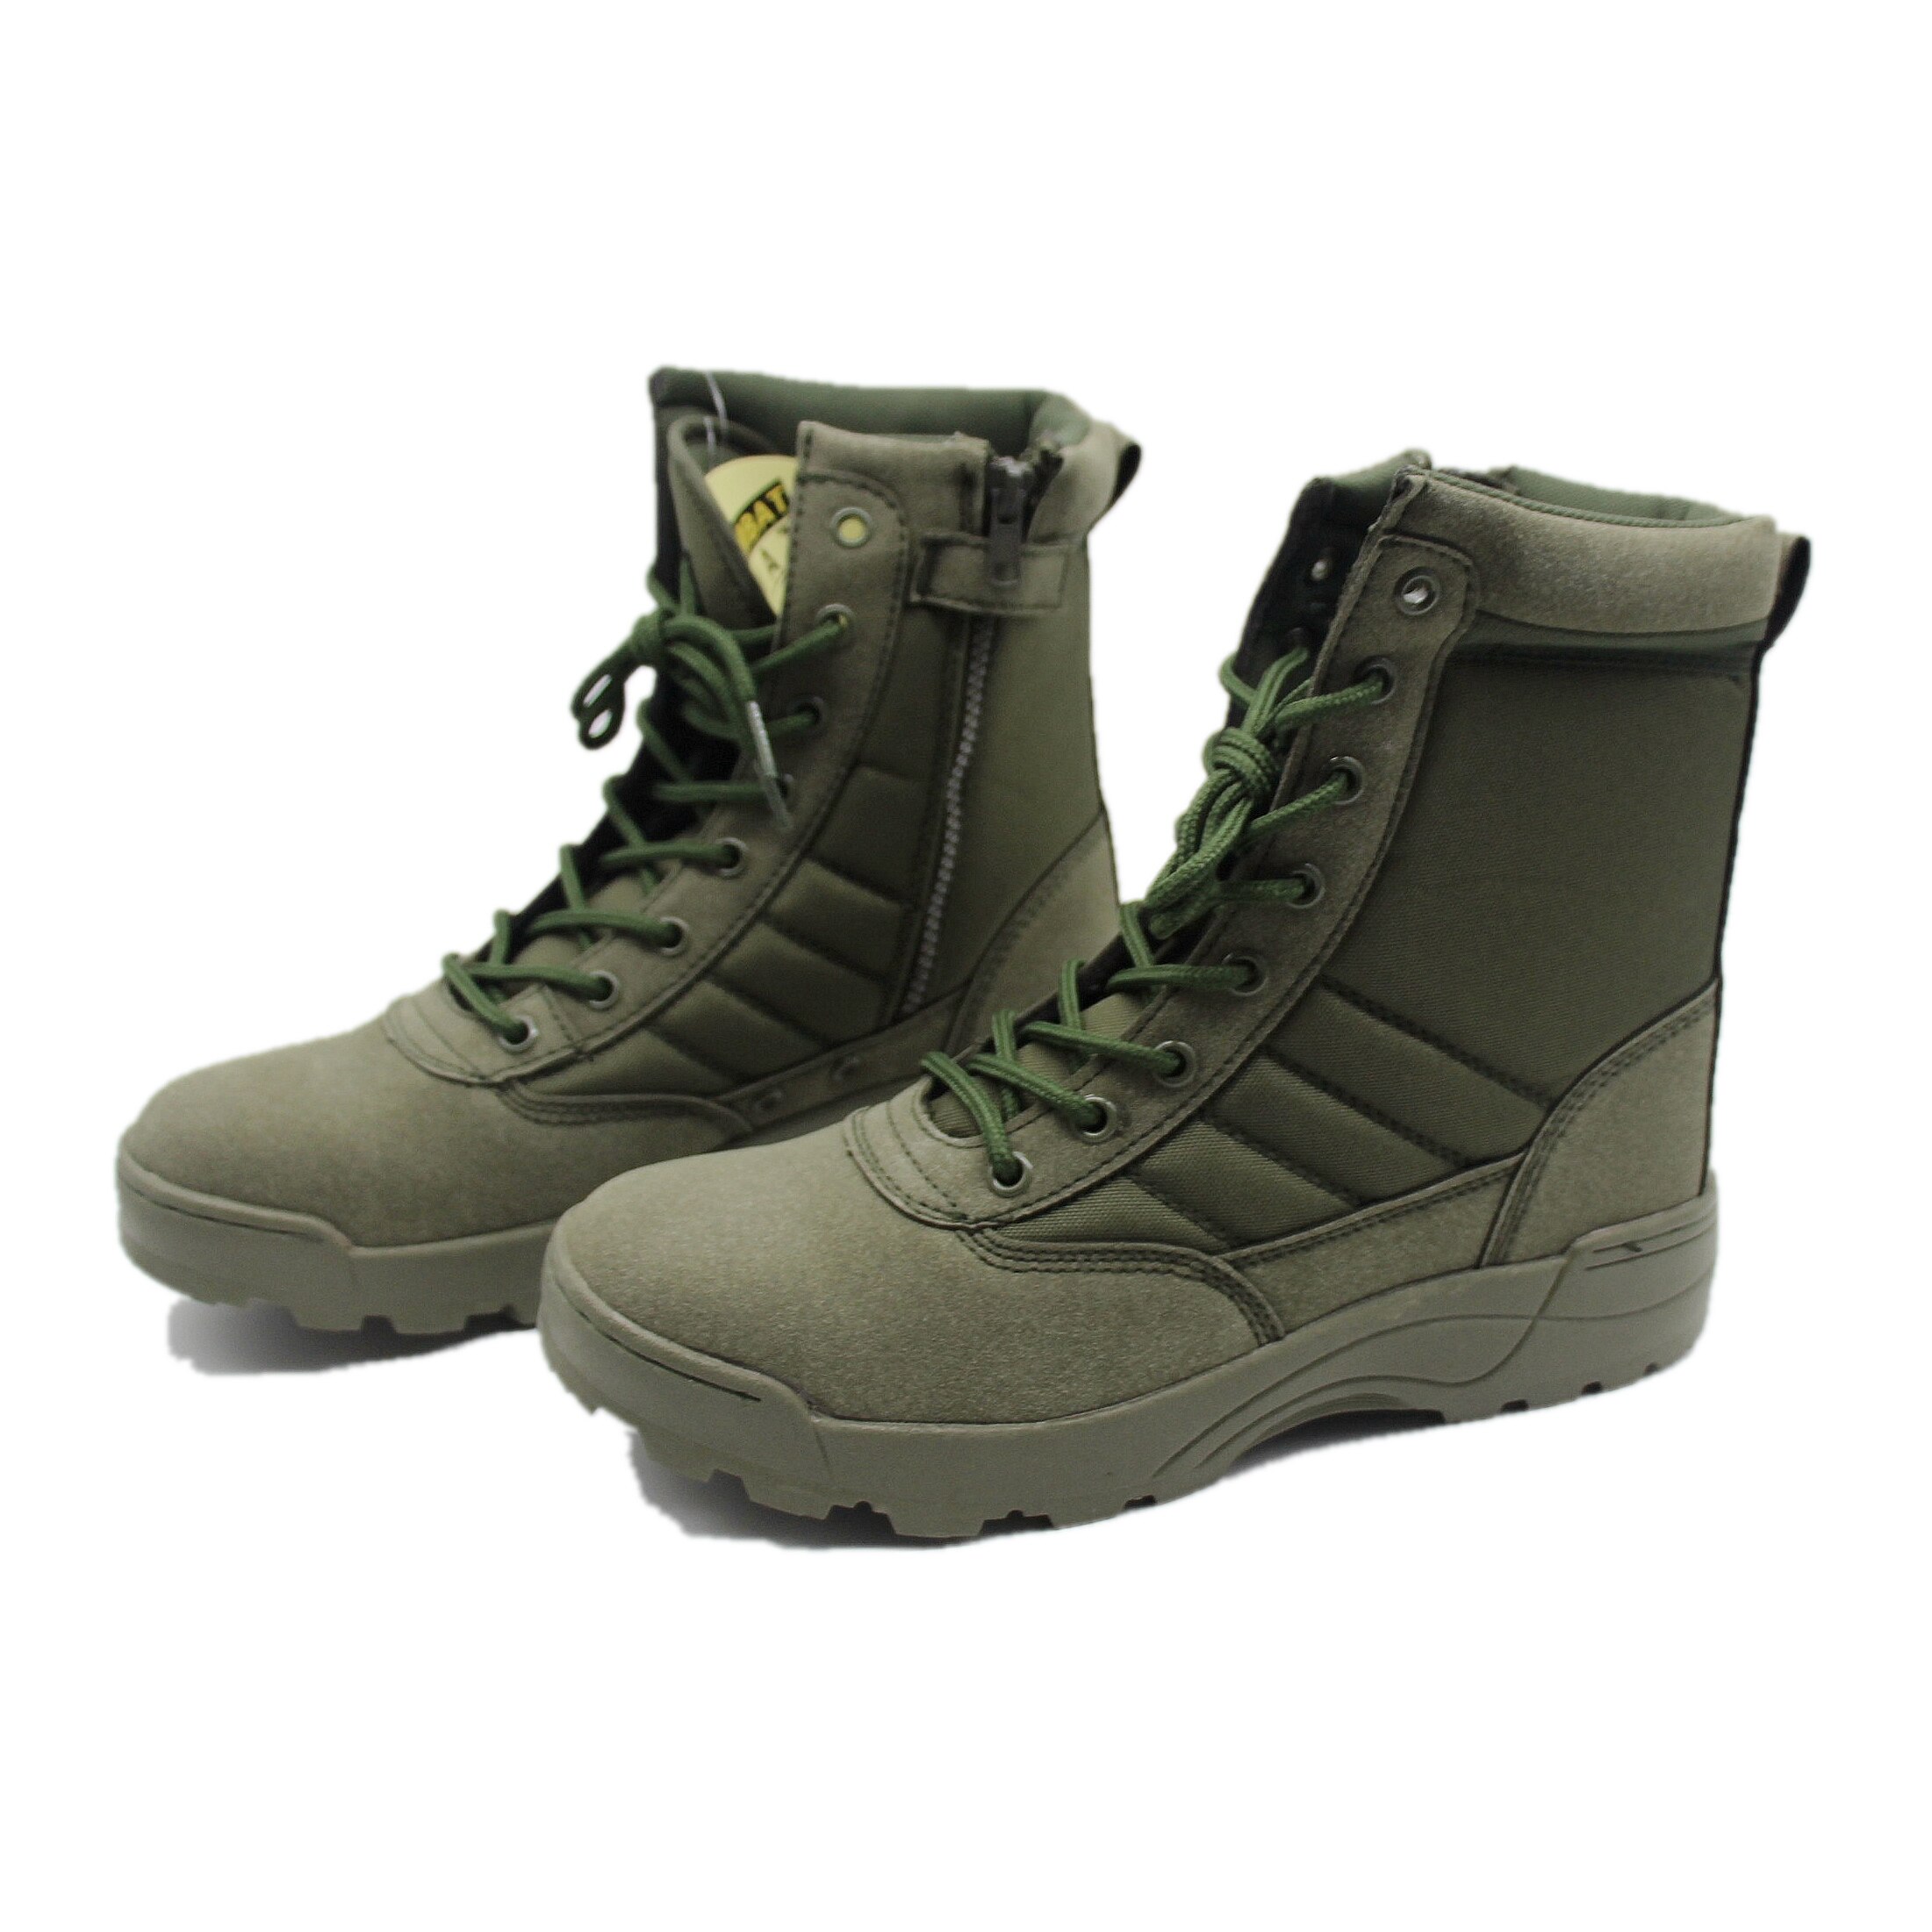 Tactical Military Combat Boots Hunting Outdoor Hik..